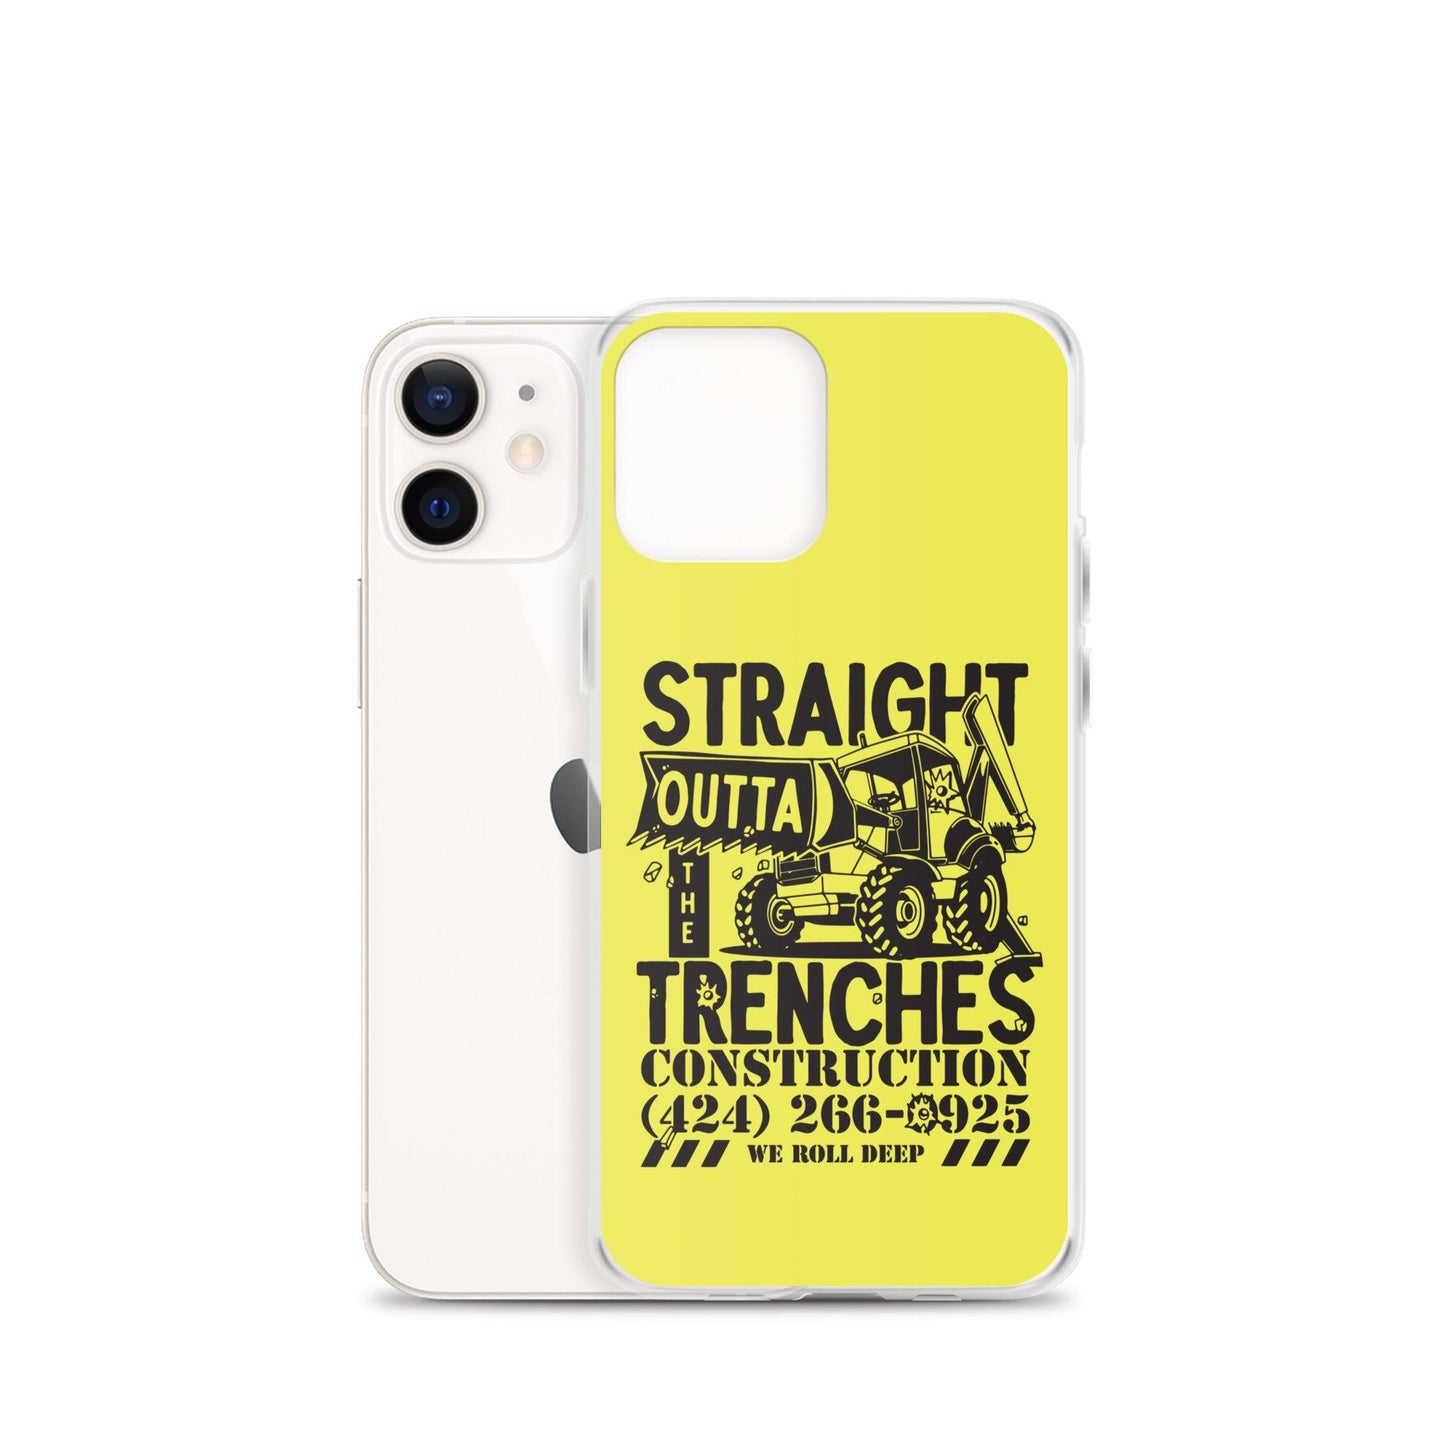 Trenches Case for iPhone®-Open 925